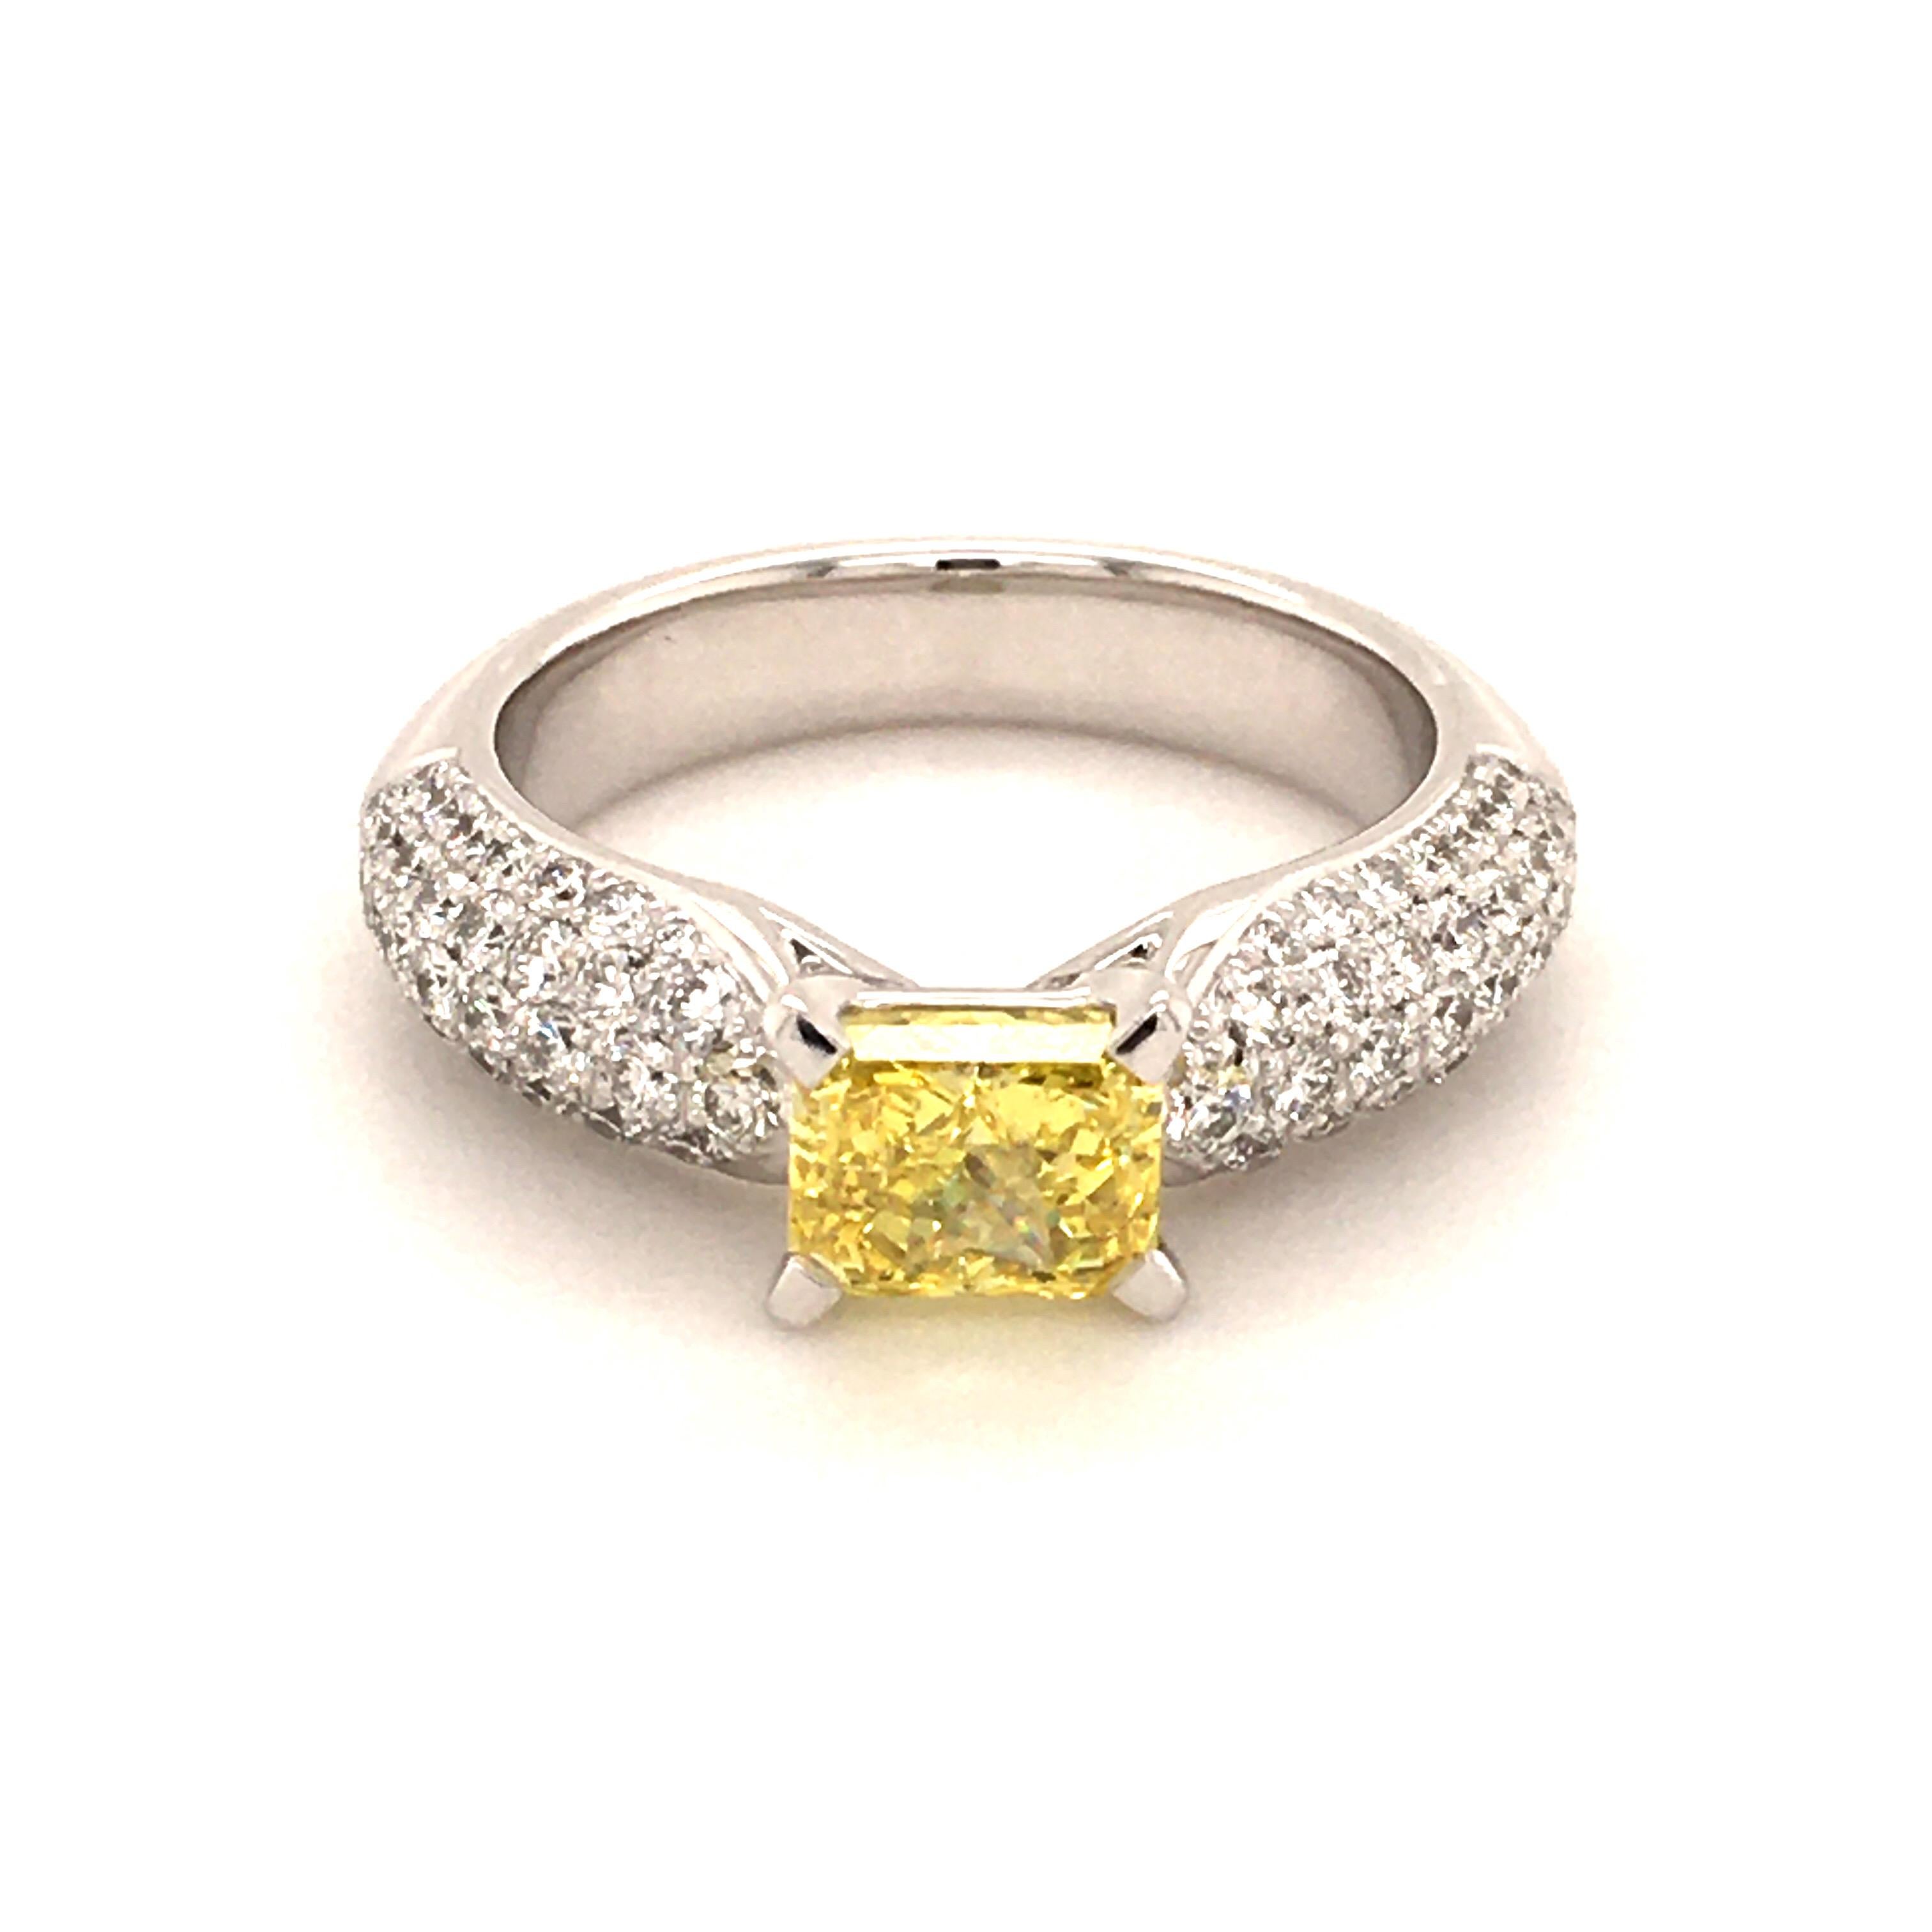 This elegant ring in white gold 750 is created by Gübelin, a famous Swiss jeweller. Its center of attraction is a 1.20 ct fancy vivid yellow radiant cut diamond with a vvs2 clarity. The diamond is GIA certified. It is surrounded by 78 brilliant cut